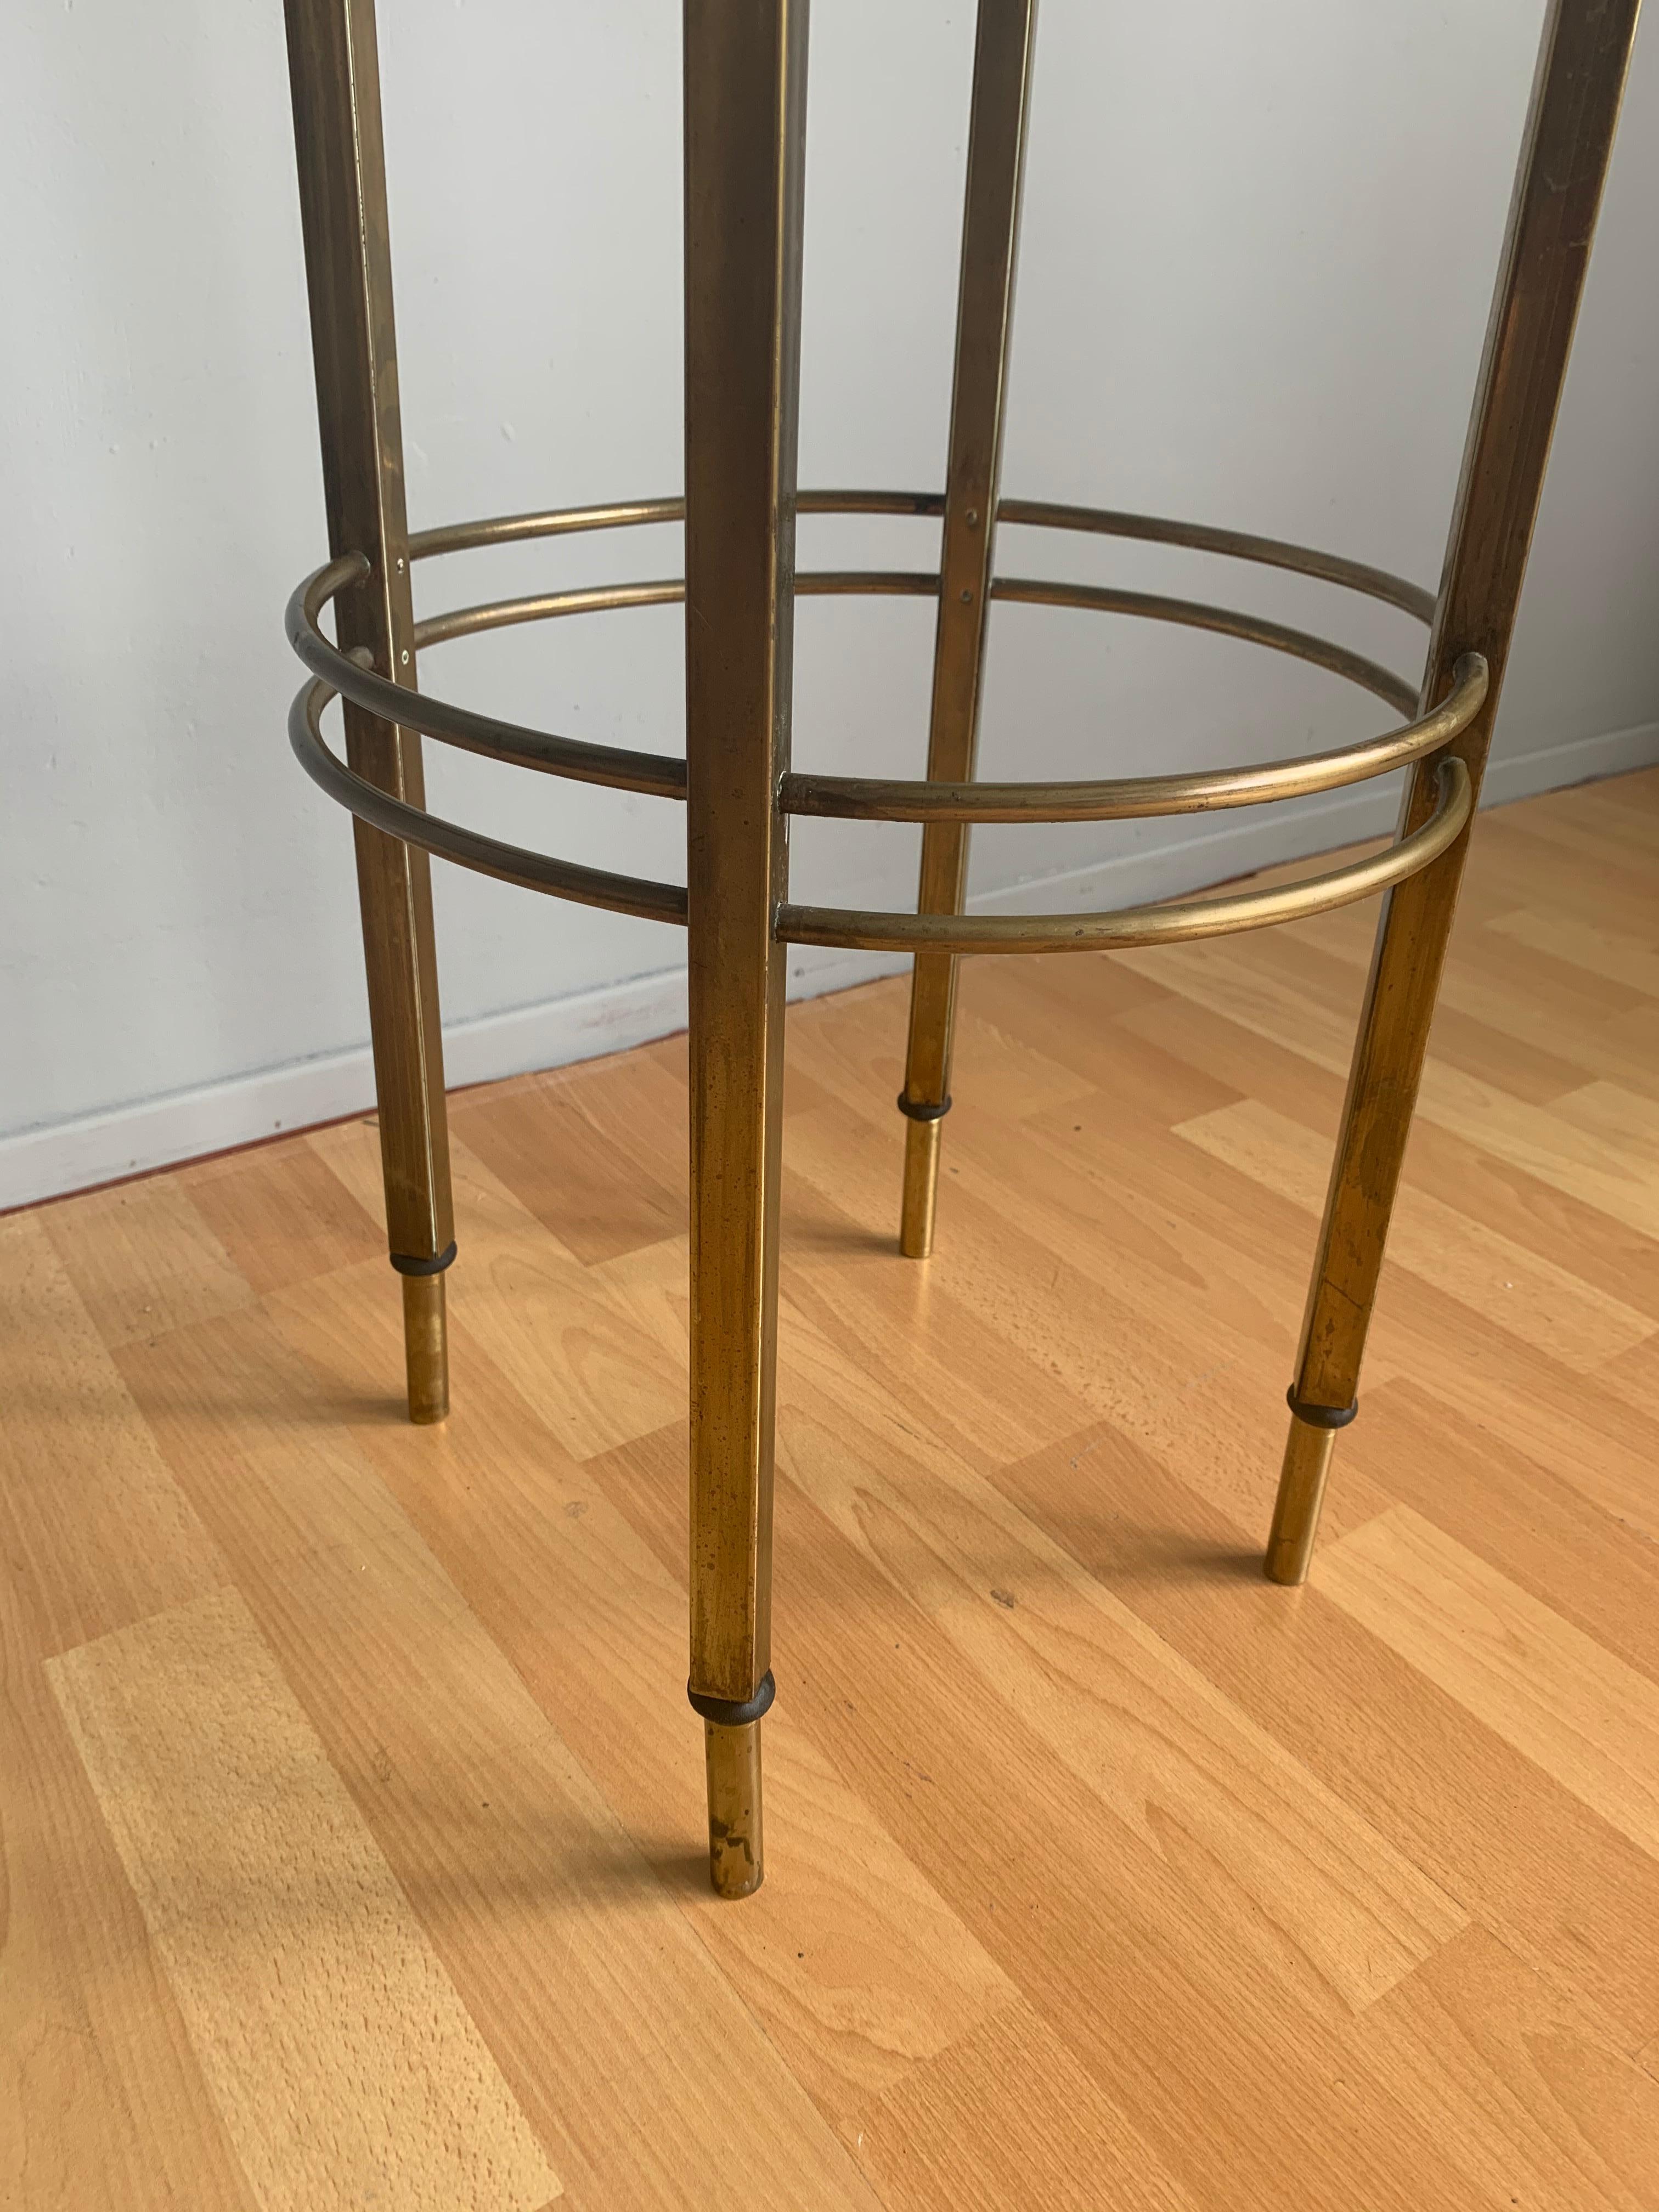 Viennese Secession Brass and Wood Pedestal or Display Stand by Ernst Rockhausen 11